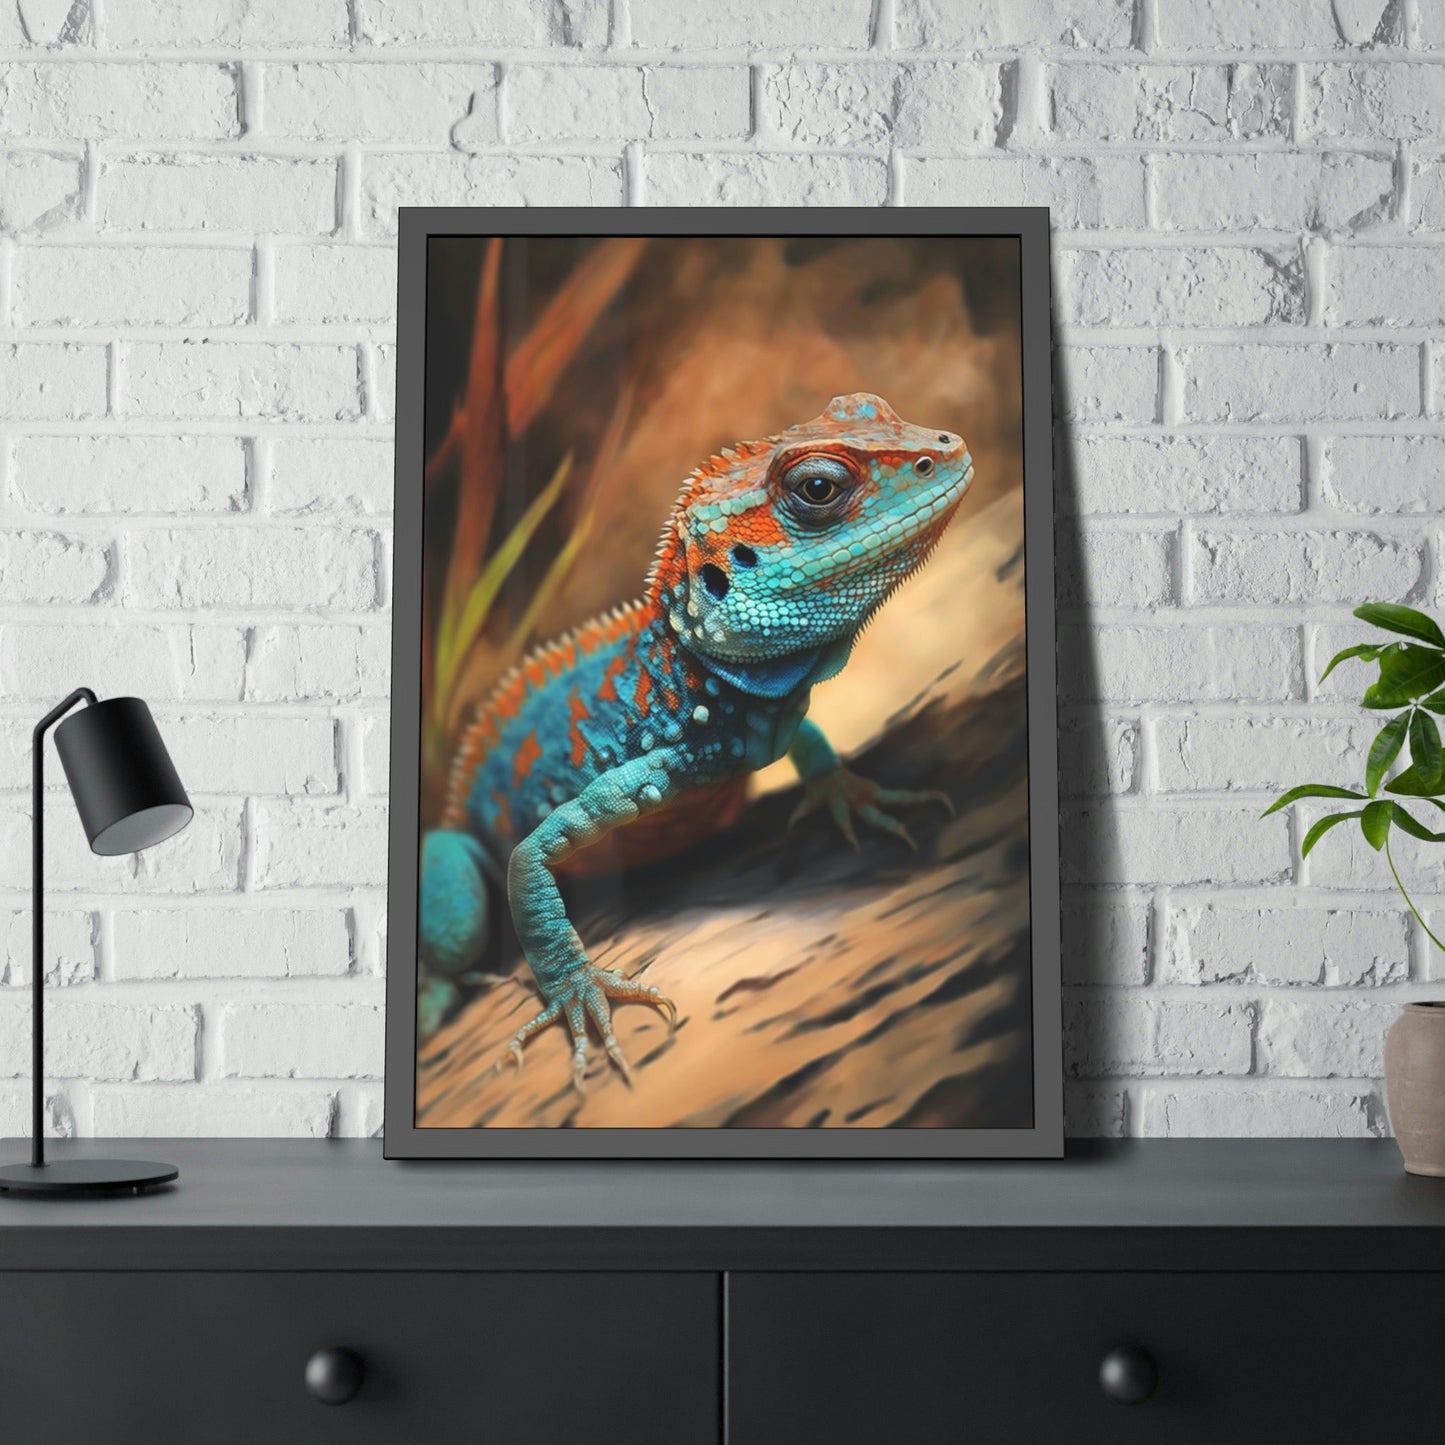 The Lizard King: Artistic Poster Featuring Regal Reptiles